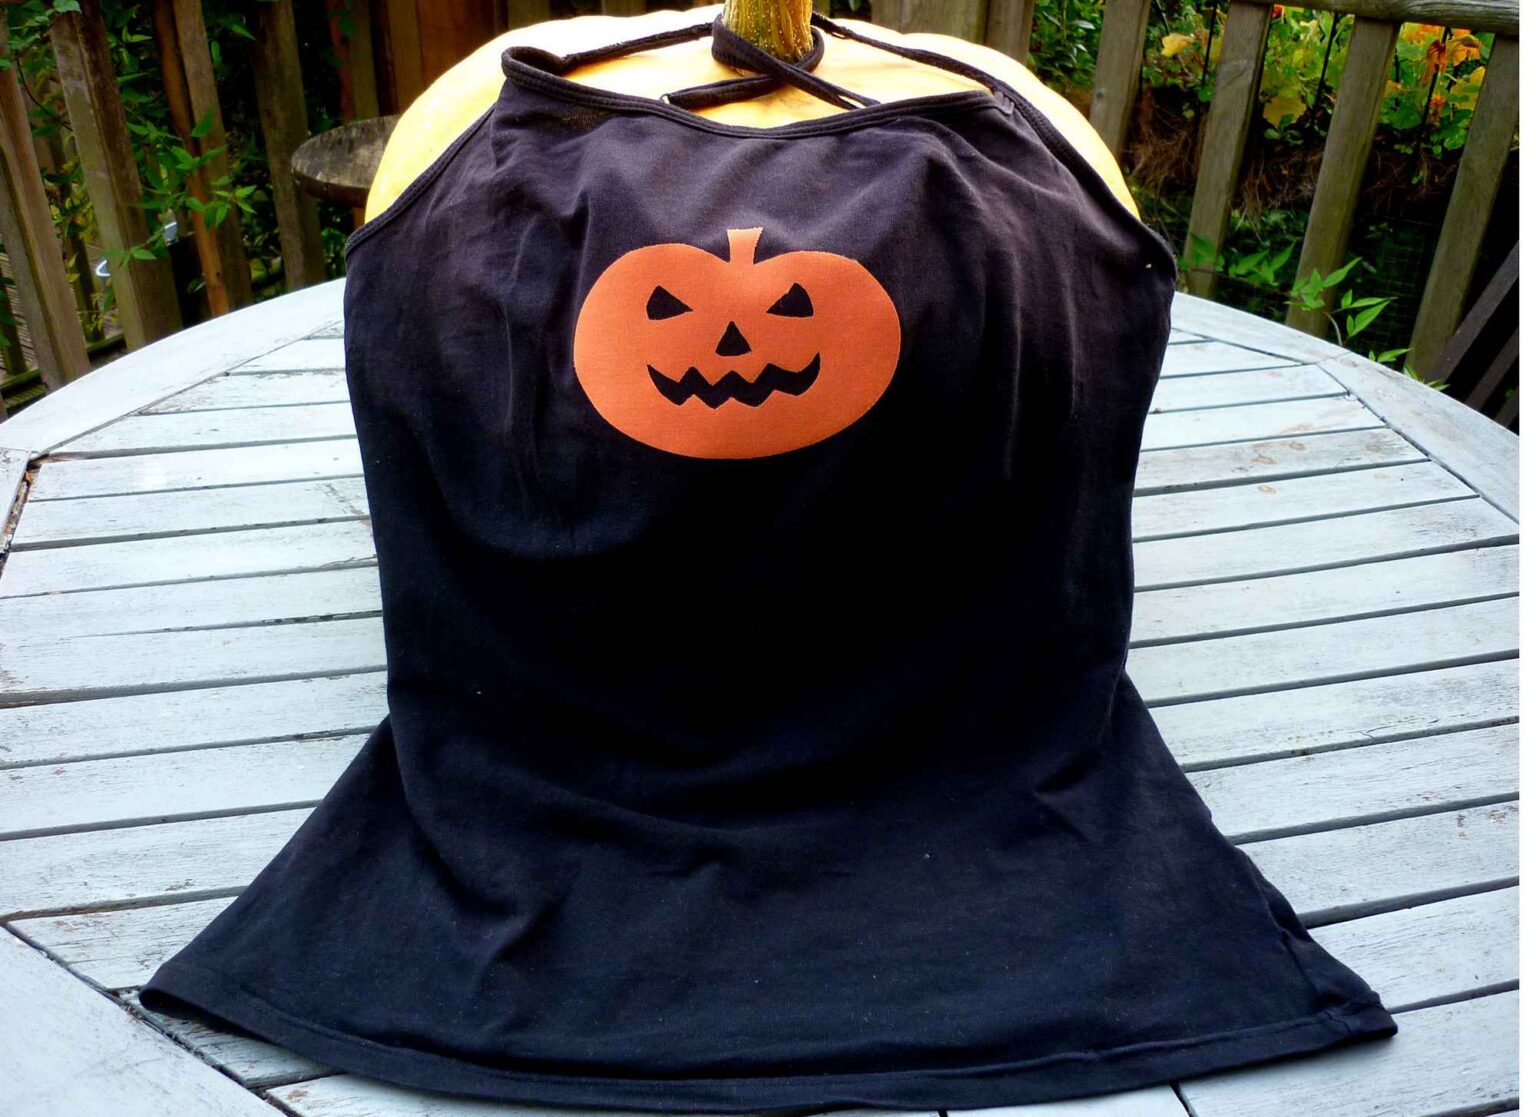 black strappy camisole vest top with orange pumpkin face motif on the front draped over a real pumpkin fruit